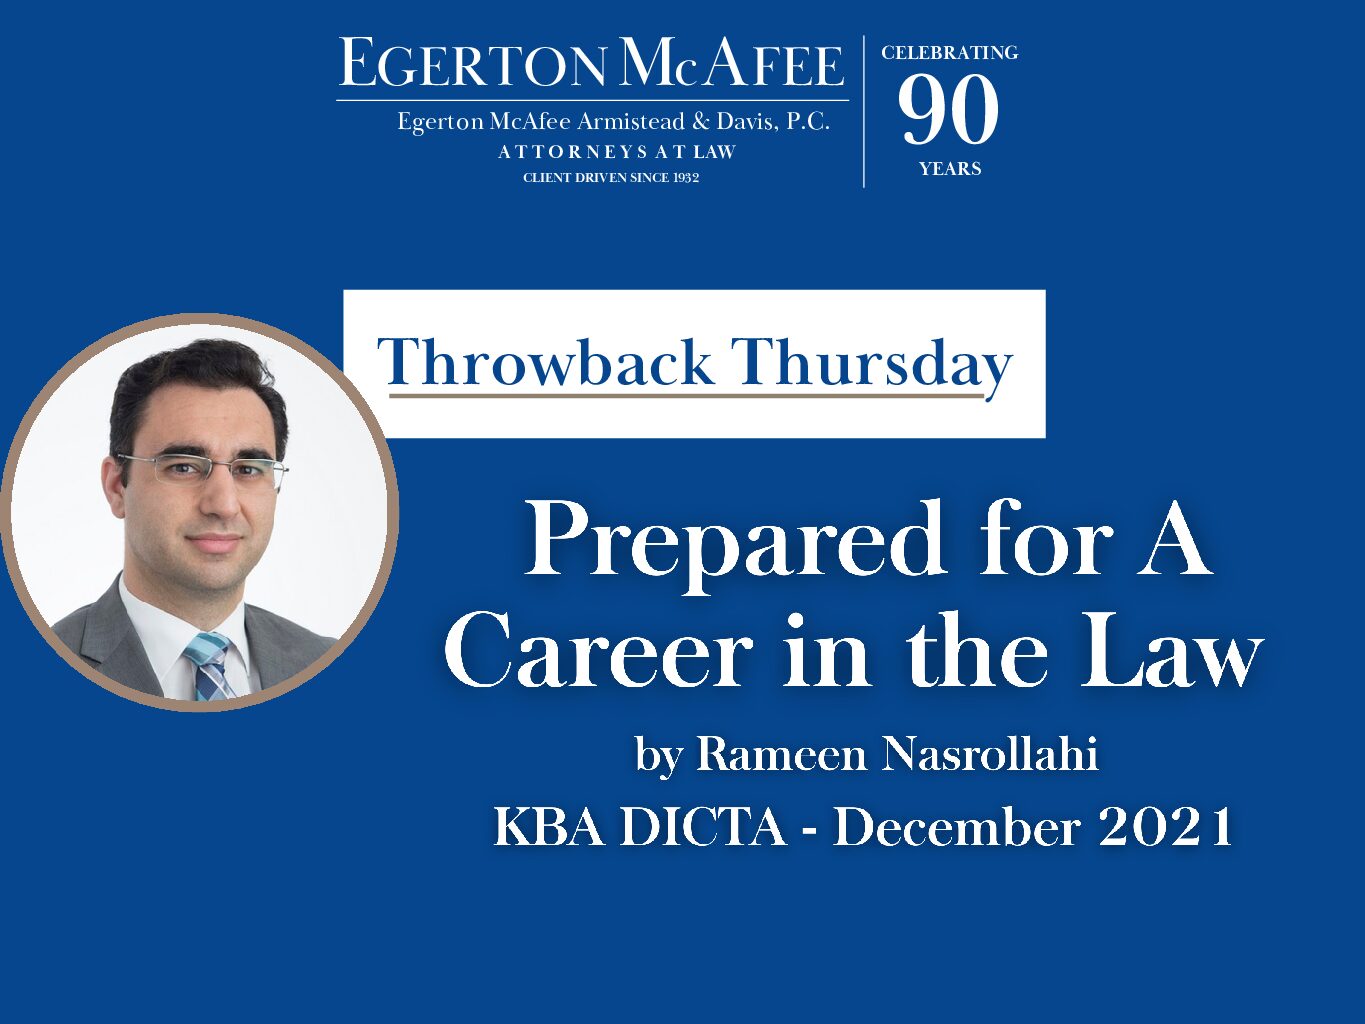 Throwback Thursday – PREPARED FOR A CAREER IN THE LAW by Rameen Nasrollahi